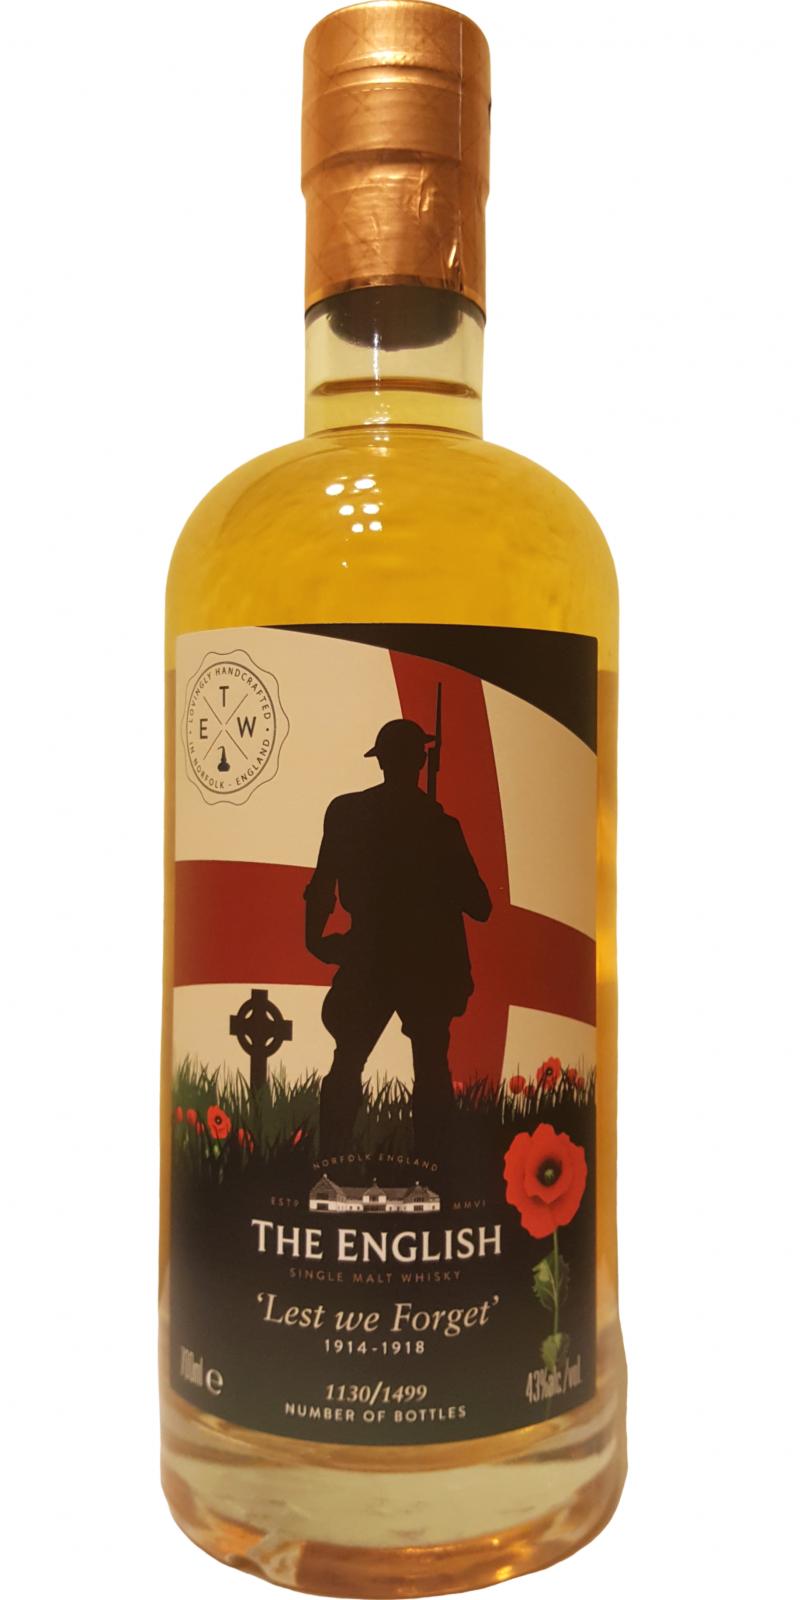 The English Whisky Lest We Forget